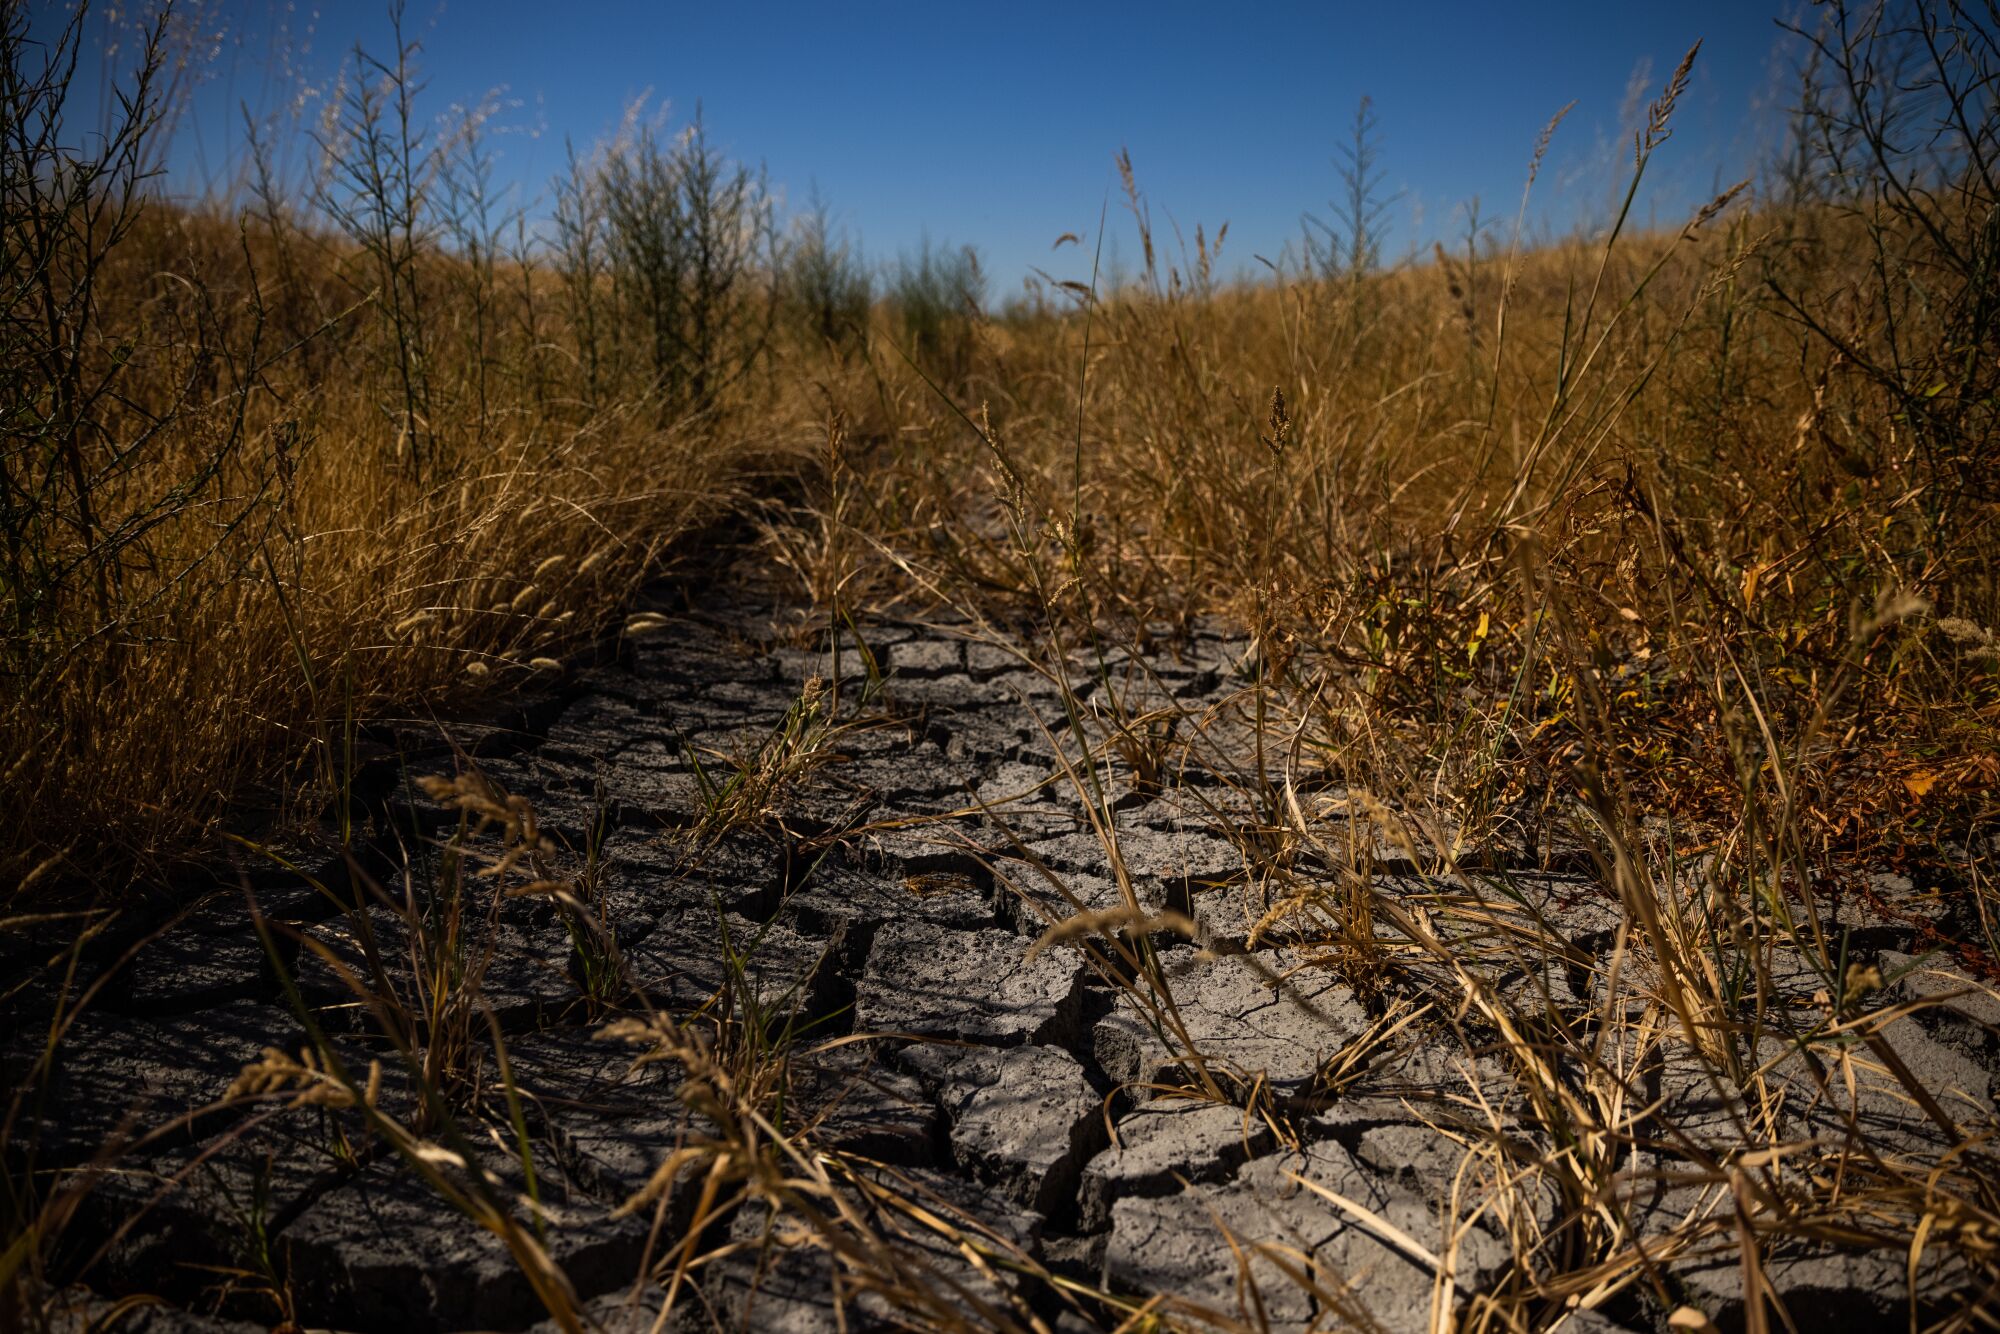 Brown plant stalks rise from cracked, dry earth.